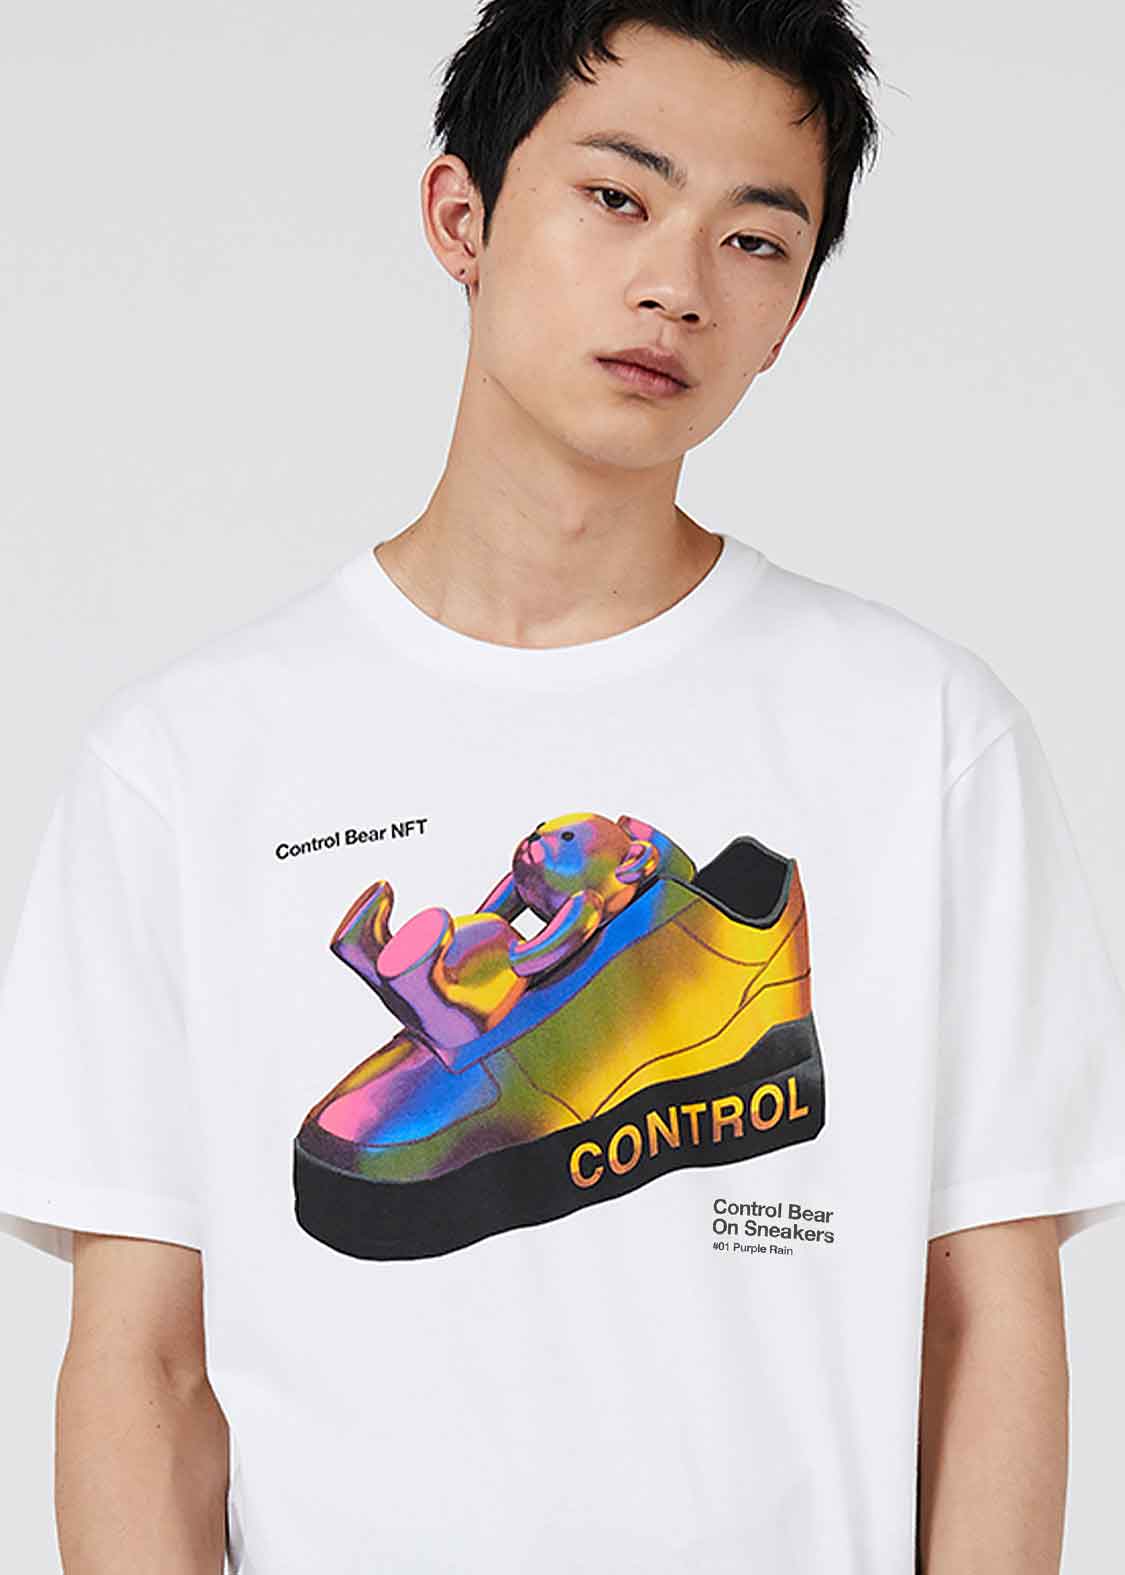 Control Bear on Sneakers